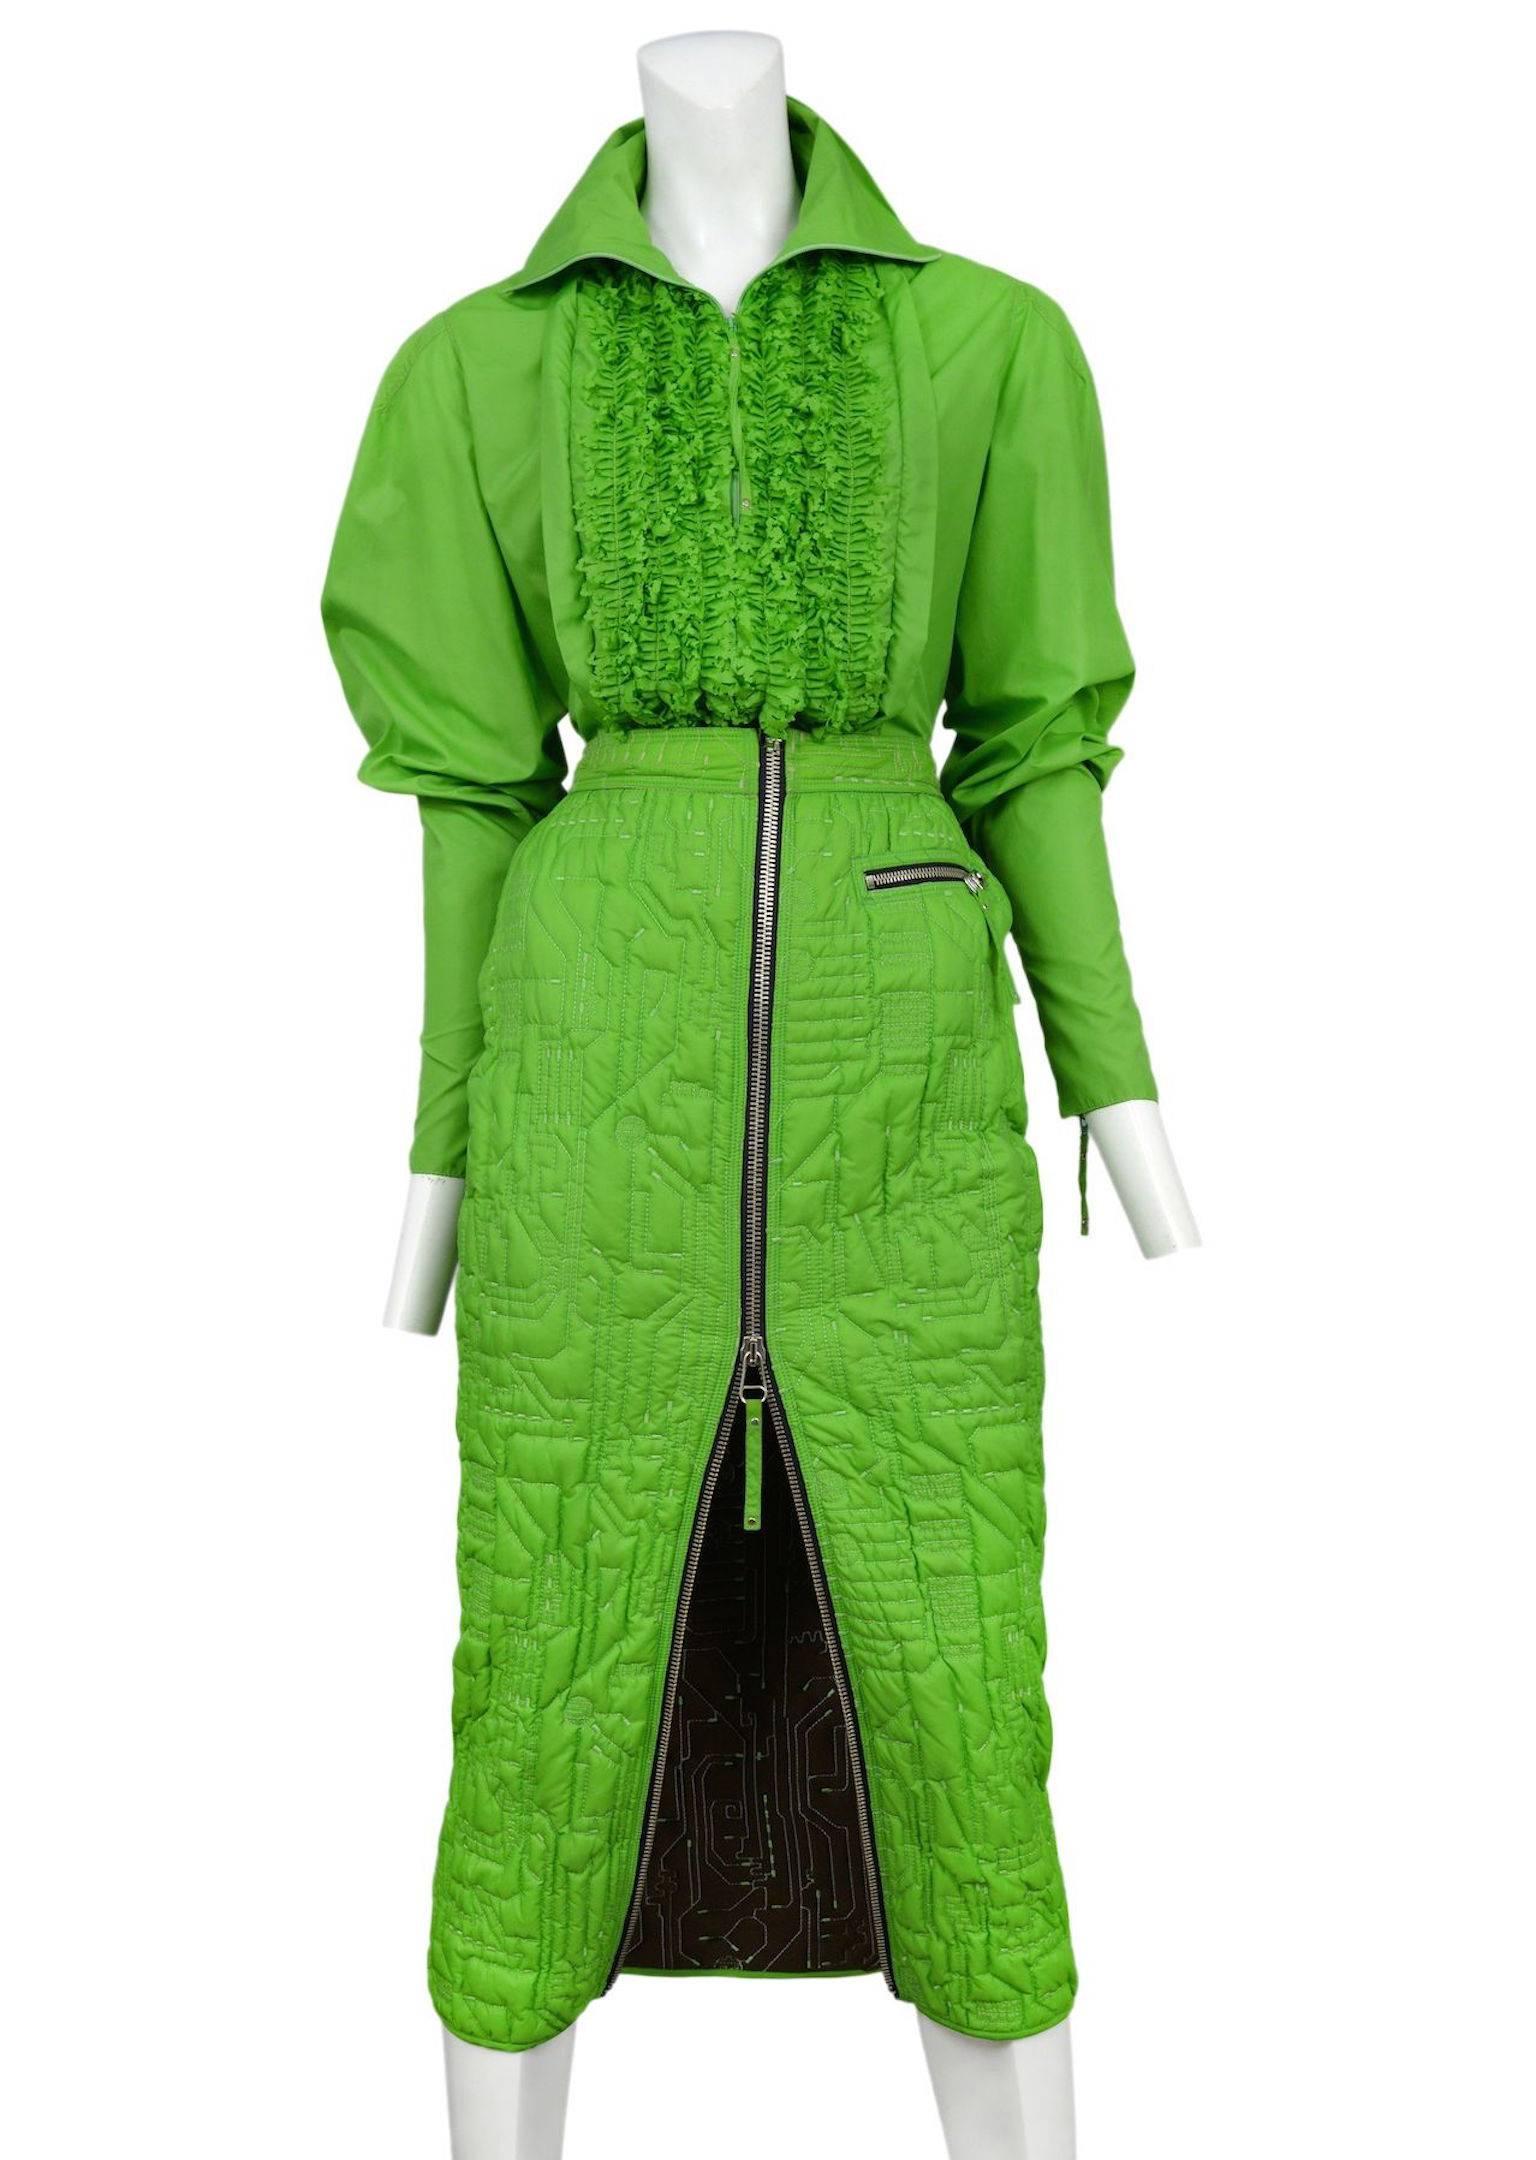 Vintage Jean Paul Gaultier neon green two piece ensemble featuring a zipper front high collard shirt with tuxedo rows of ruffles and zippers at the sleeves, and a matching zipper front mid length skirt with allover abstract circuit board trapunto